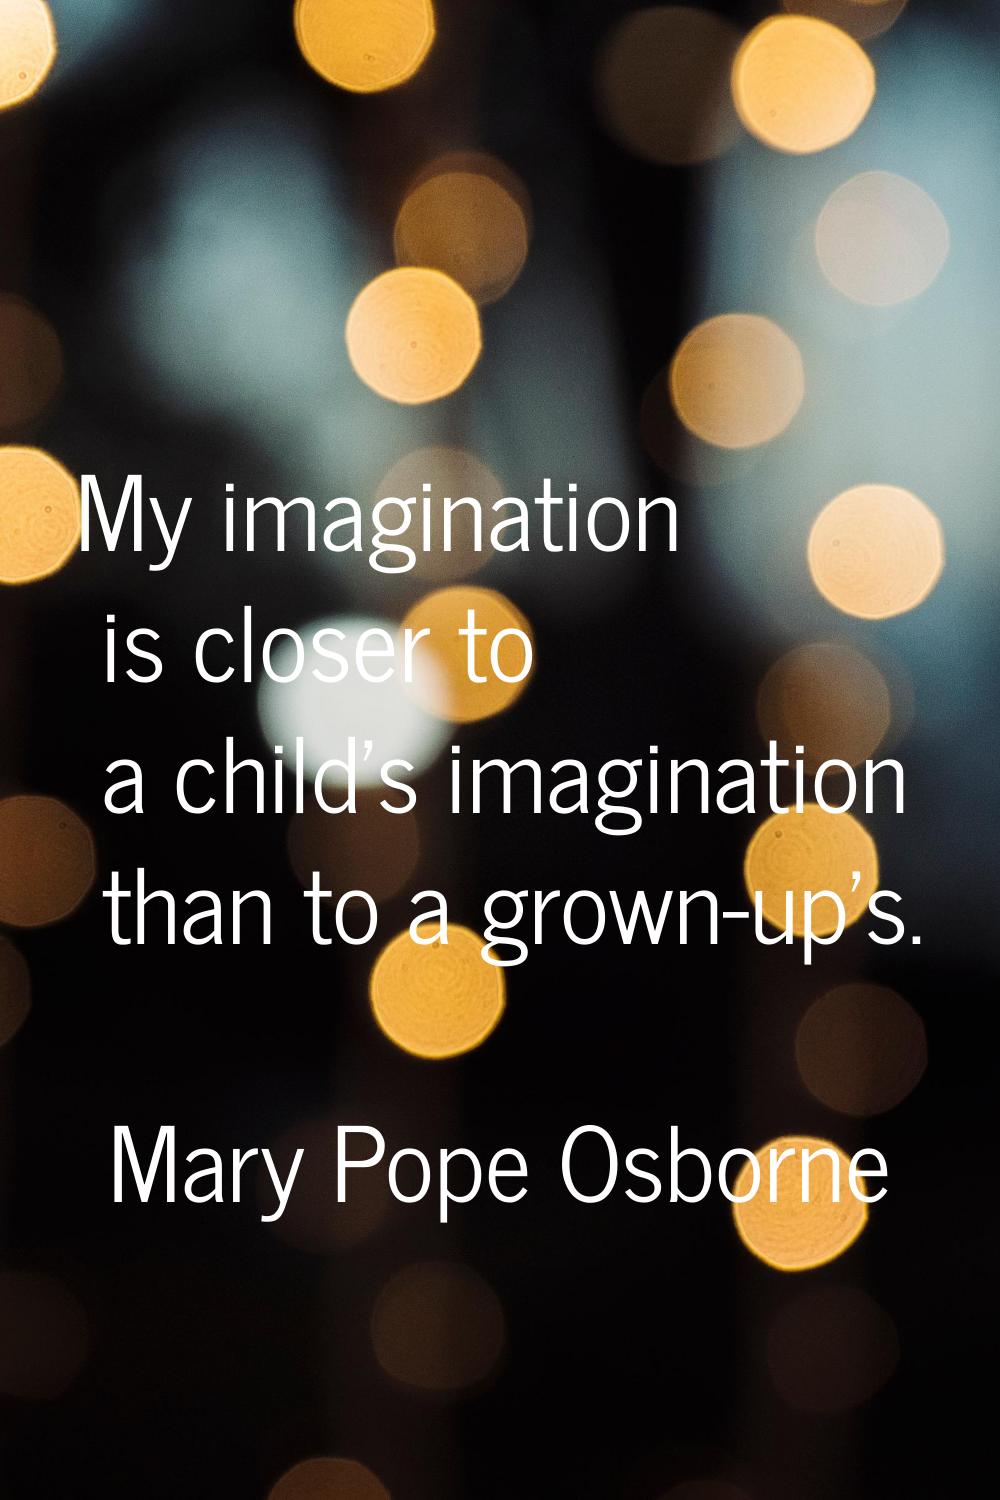 My imagination is closer to a child's imagination than to a grown-up's.